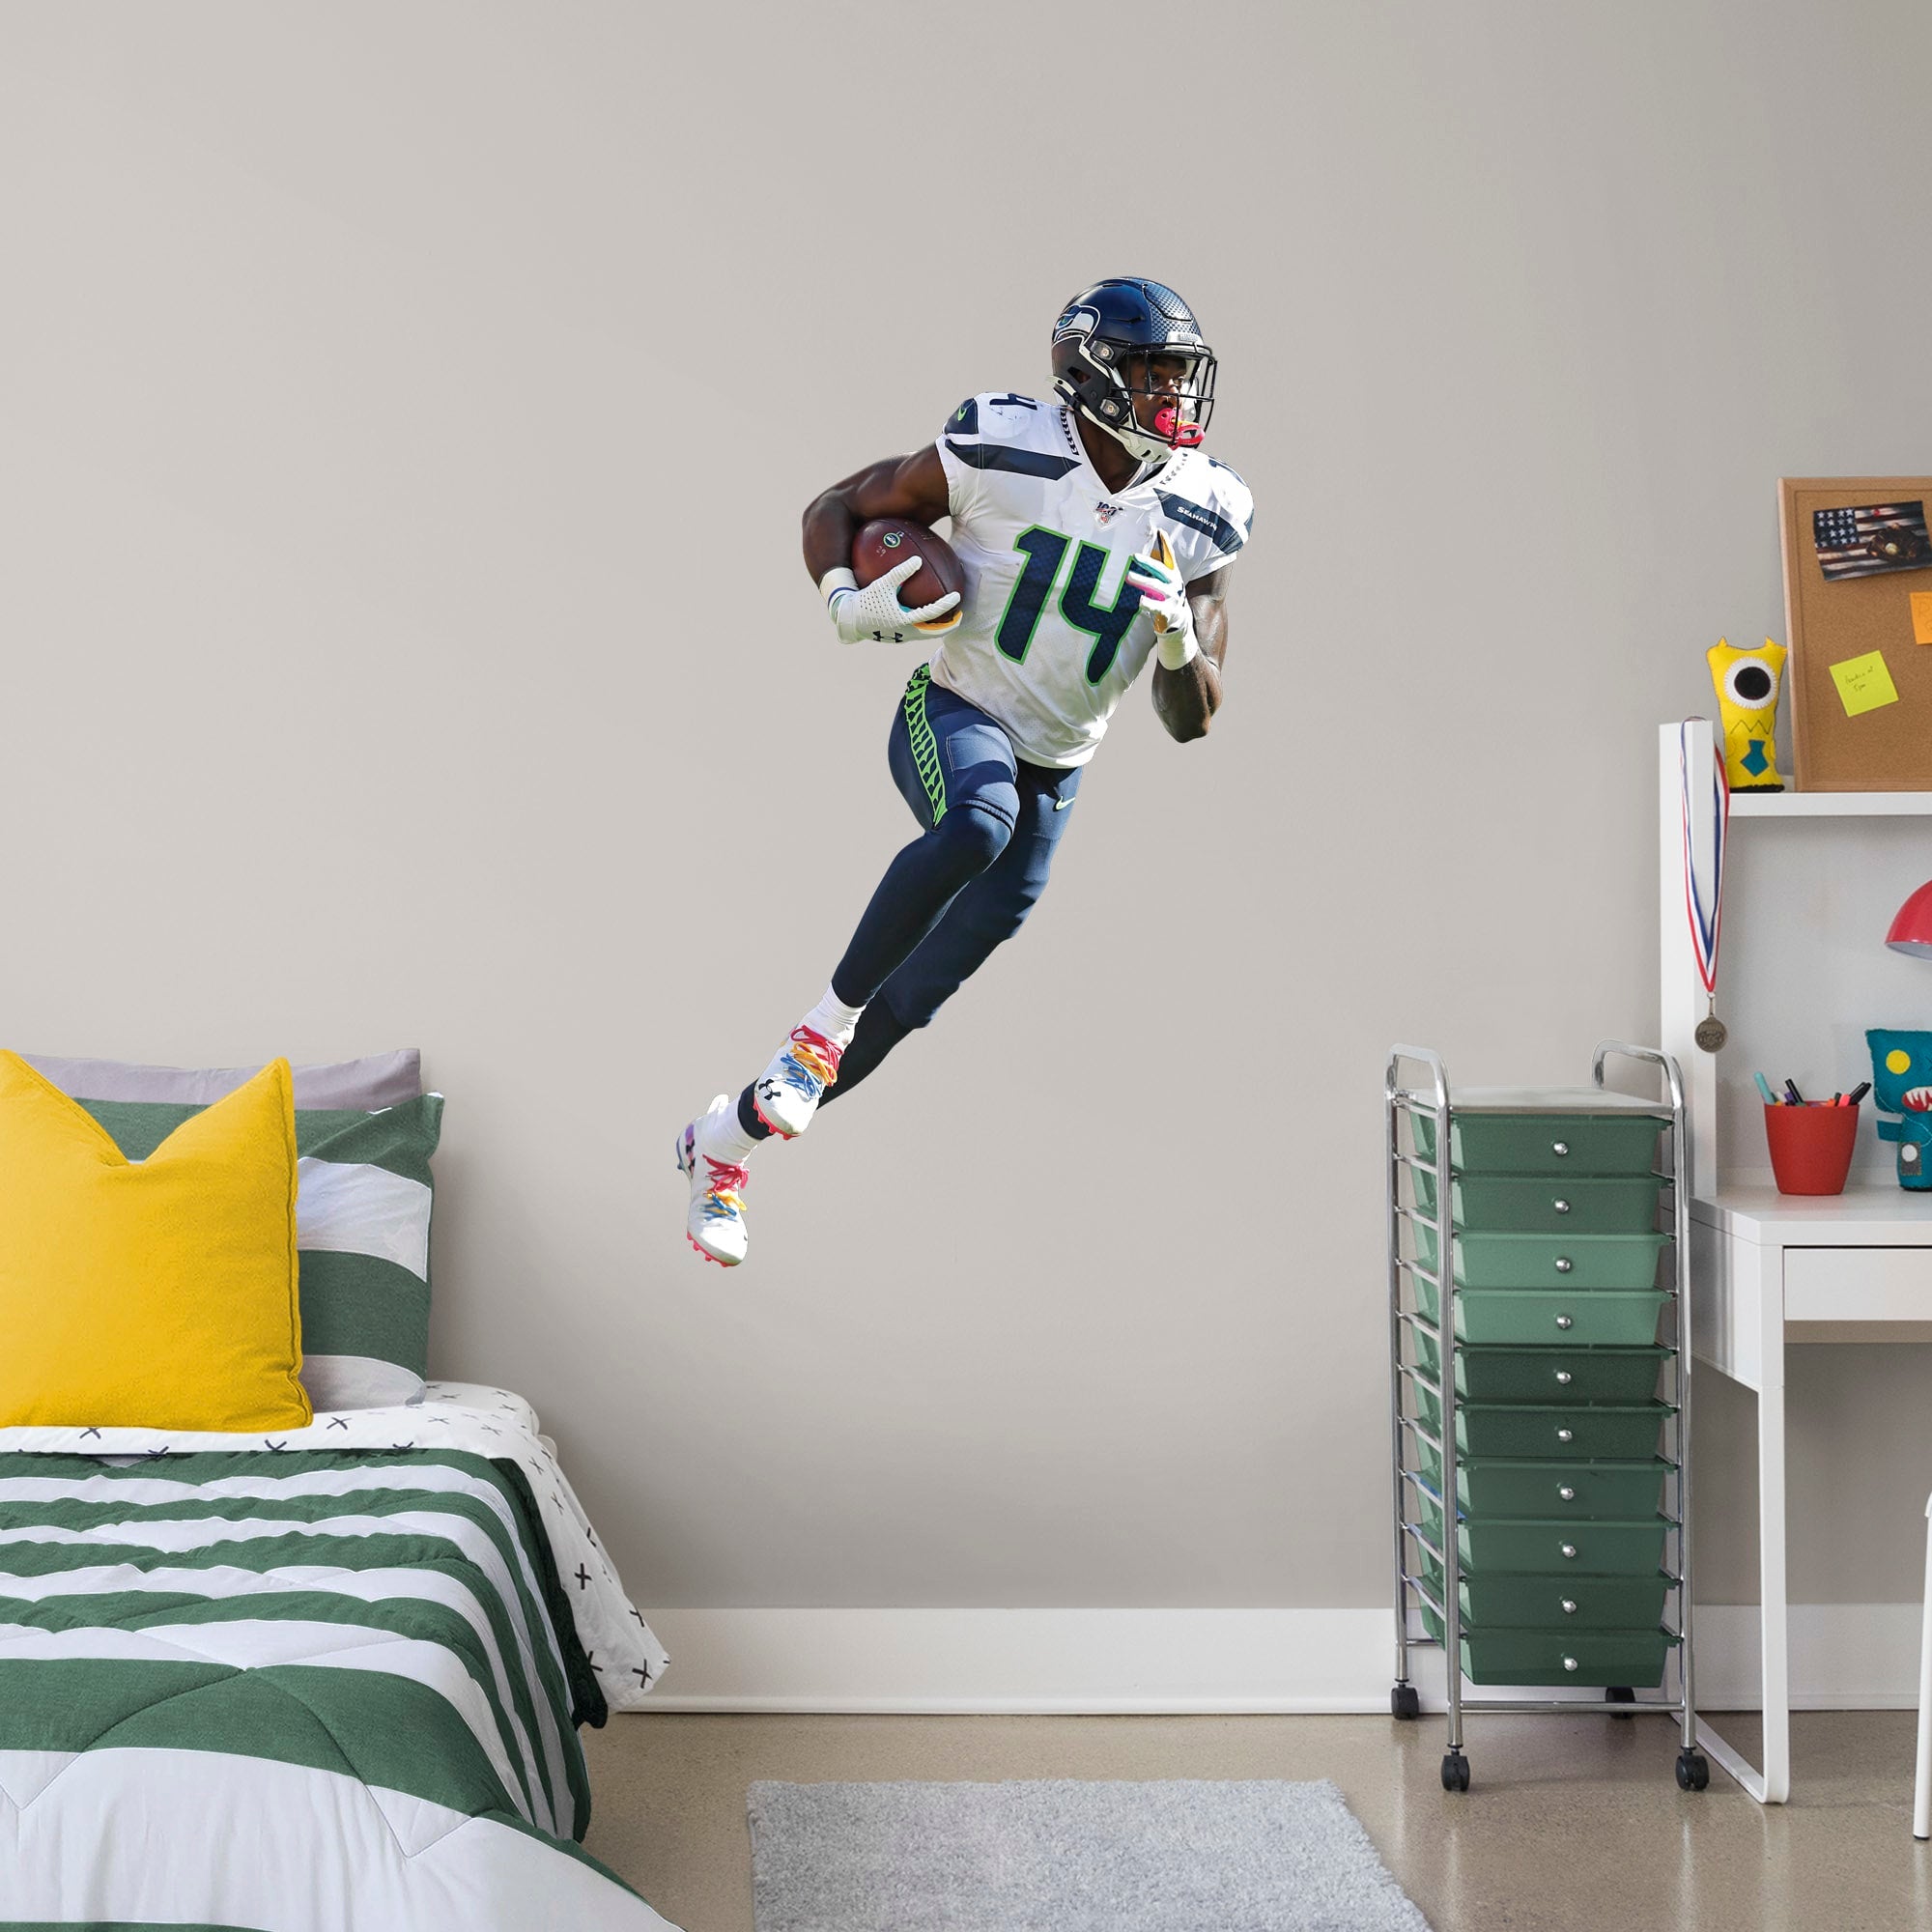 D.K. Metcalf for Seattle Seahawks - Officially Licensed NFL Removable Wall Decal Giant Athlete + 2 Decals (30"W x 51"H) by Fathe